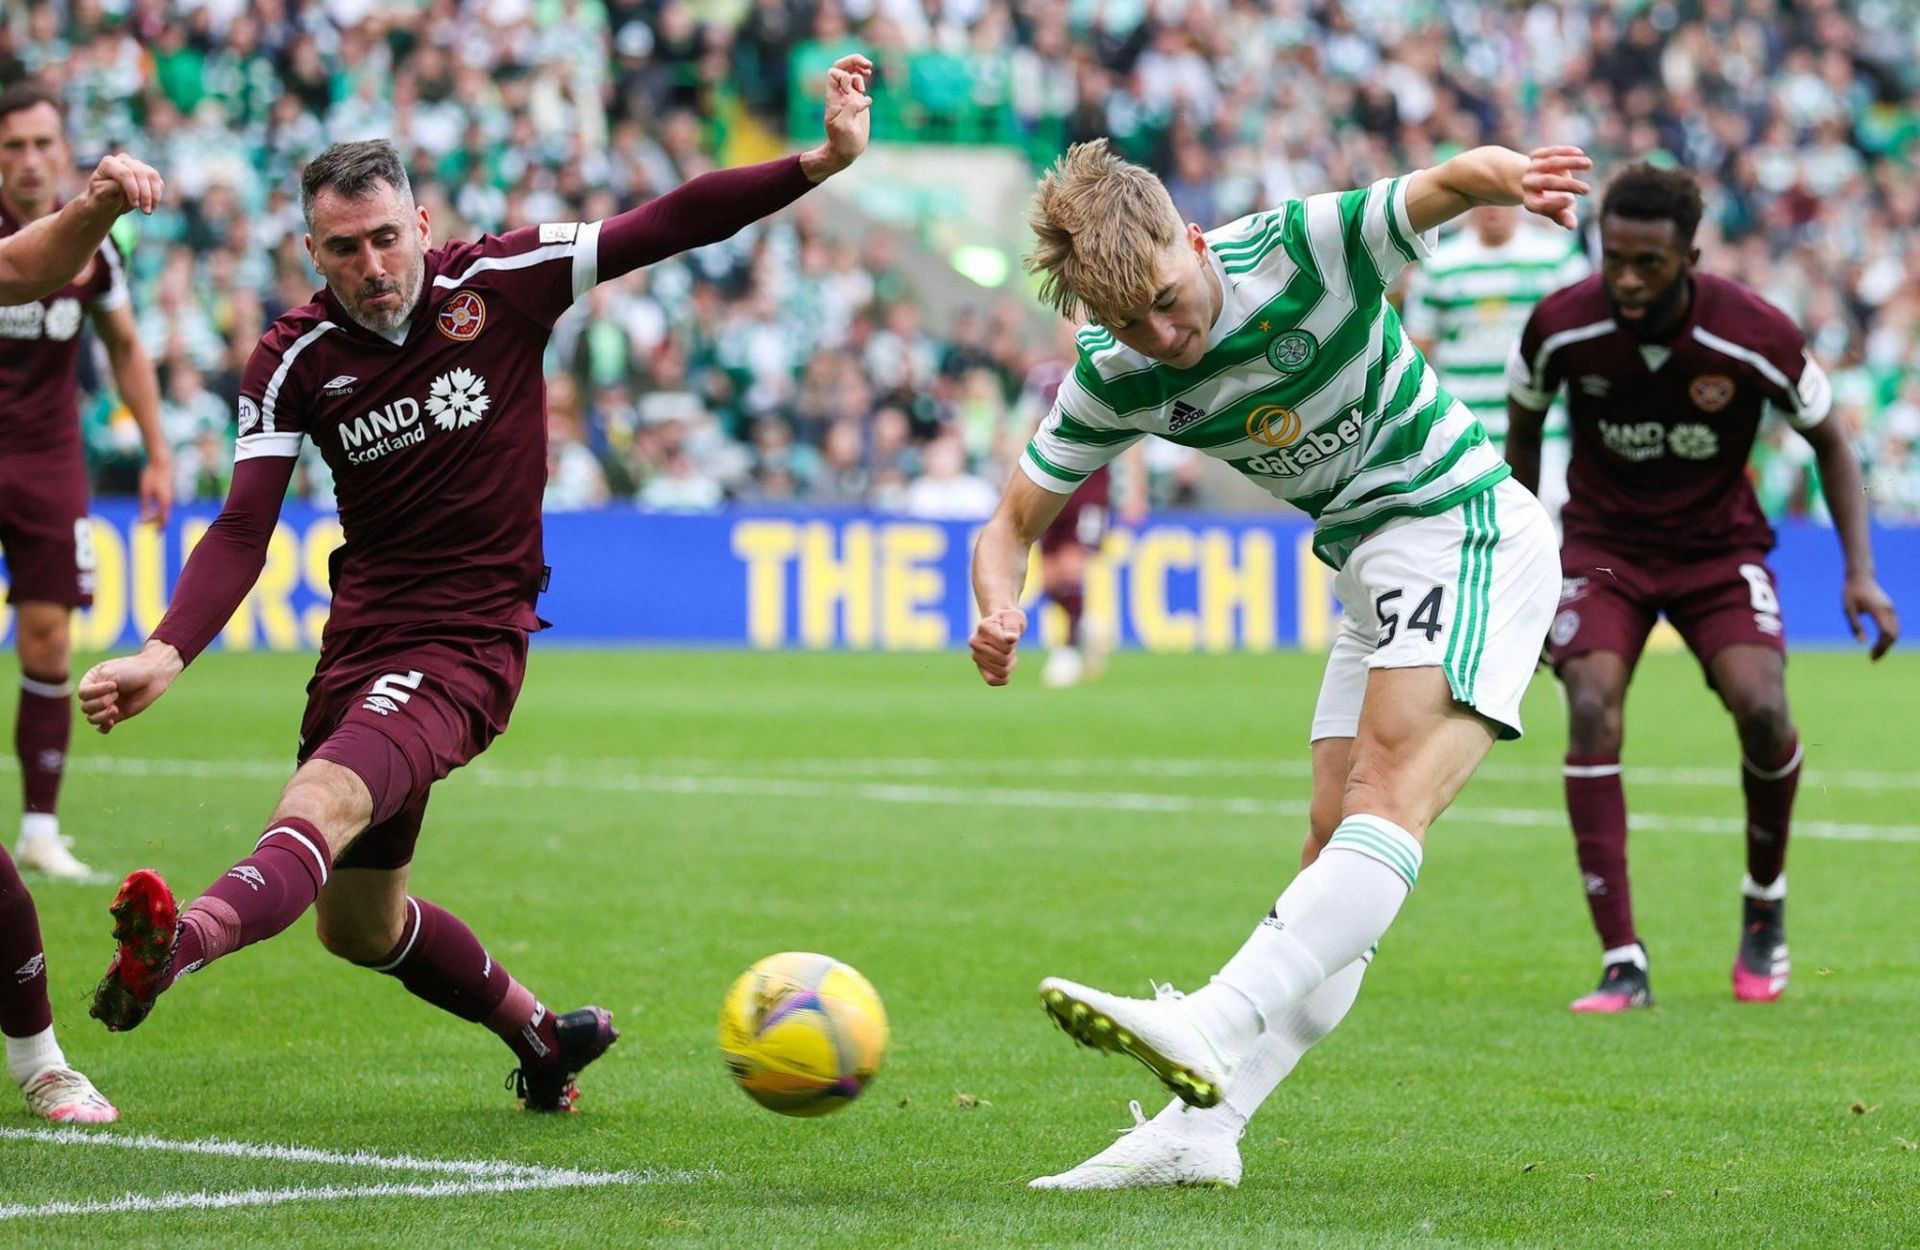 Celtic aim to maintain their top spot in the Scottish Premiership.